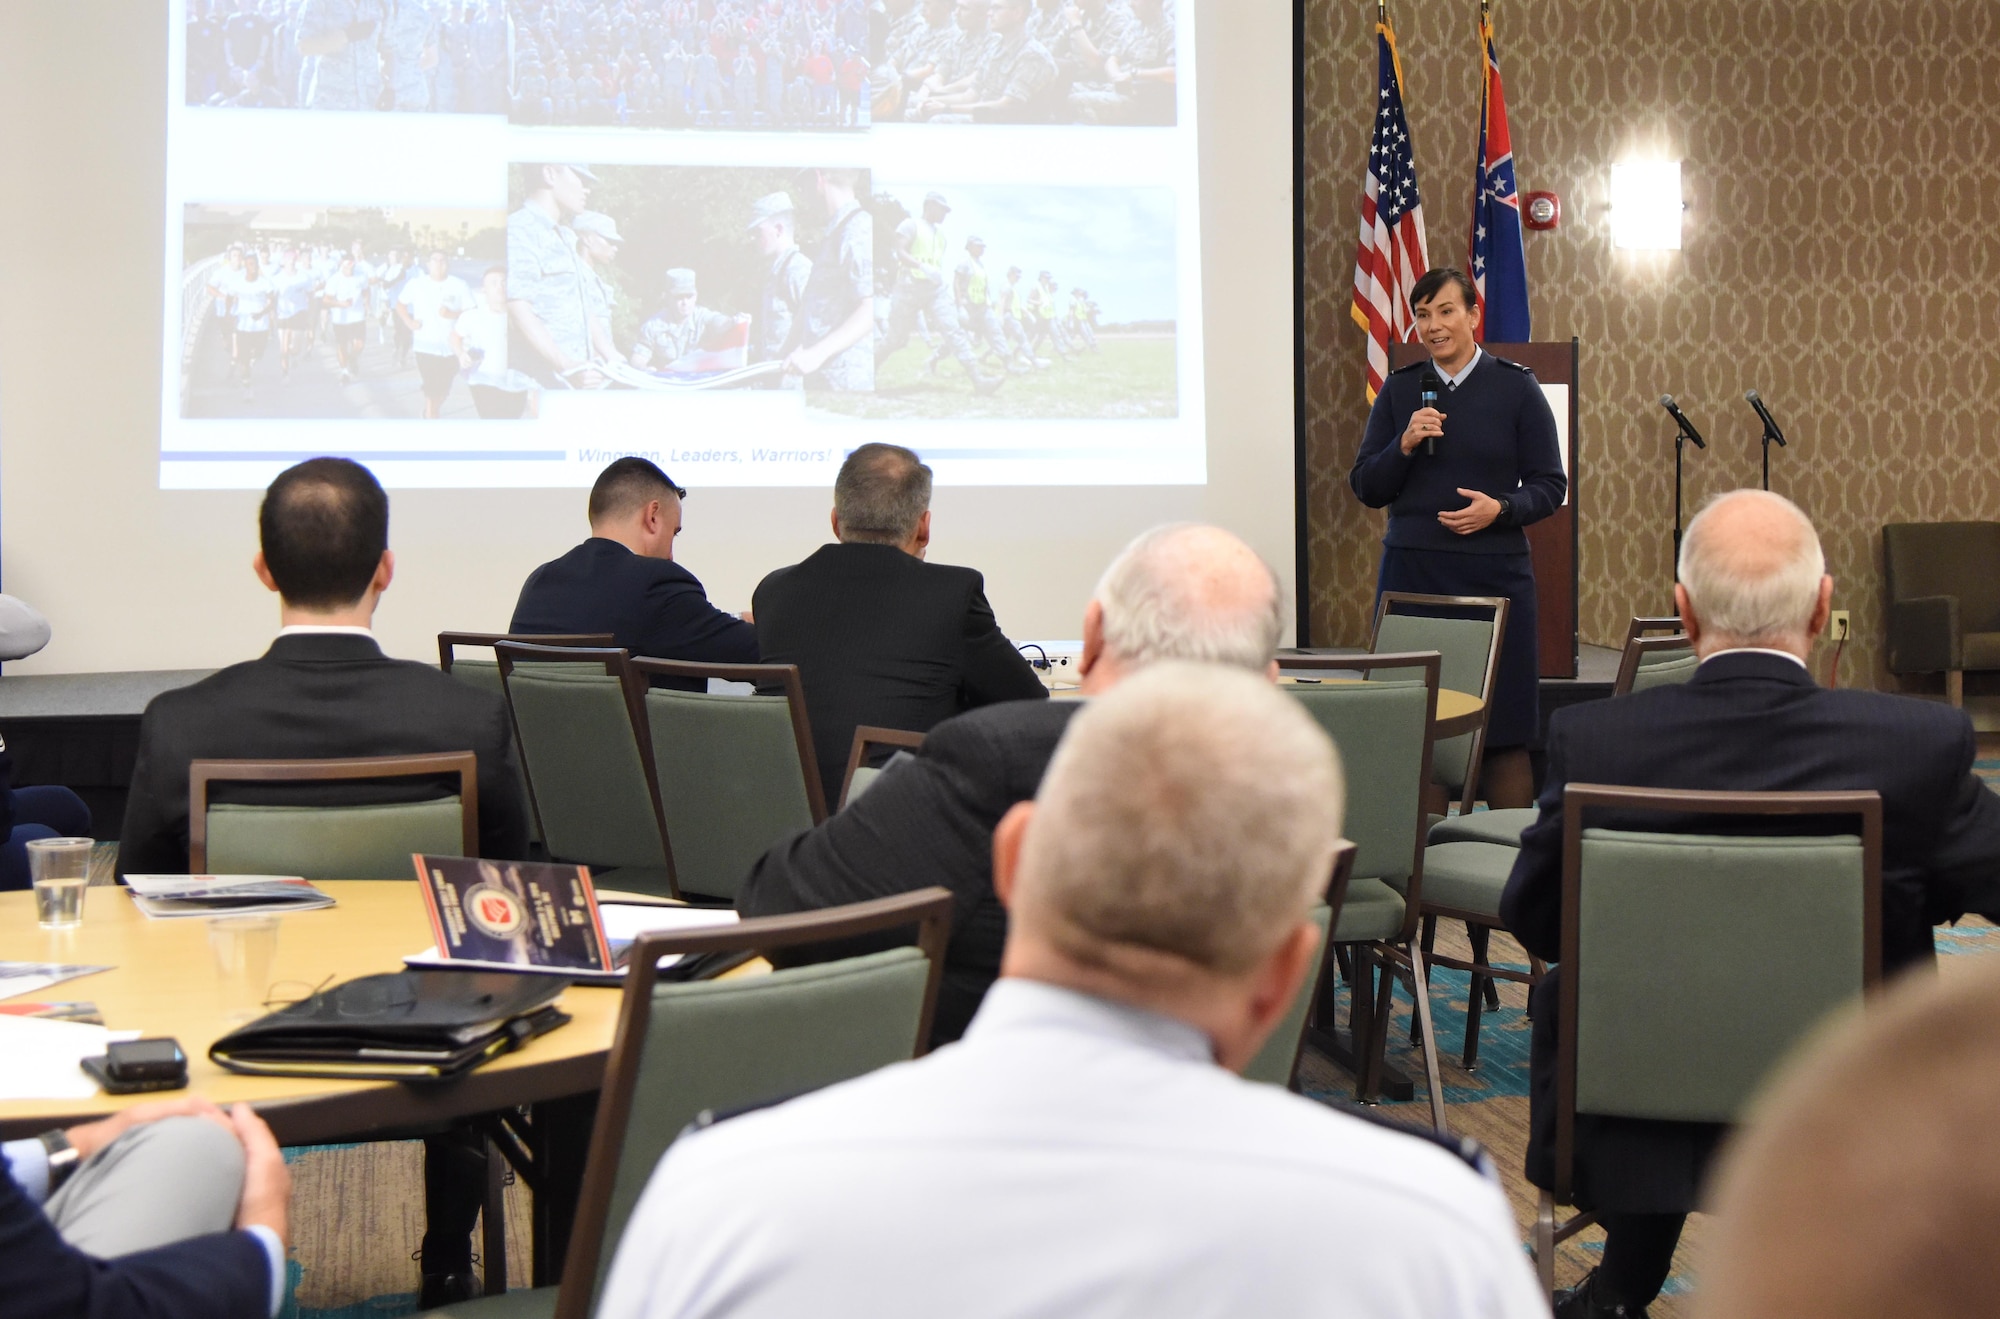 U.S. Air Force Col. Debra Lovette, 81st Training Wing commander, delivers the 81st TRW mission briefing during the Mississippi Gulf Coast Defense Forum inside the Courtyard by Marriott Gulfport Beachfront in Gulfport, Mississippi, Dec. 3, 2018. The two-day forum is a product of the Association of Defense Communities, an organization focused on advancing community-military partnerships that promote the value of military installations, strengthen communities and states through collaborative relationships and sustainable regional planning. (U.S. Air Force photo by Kemberly Groue)